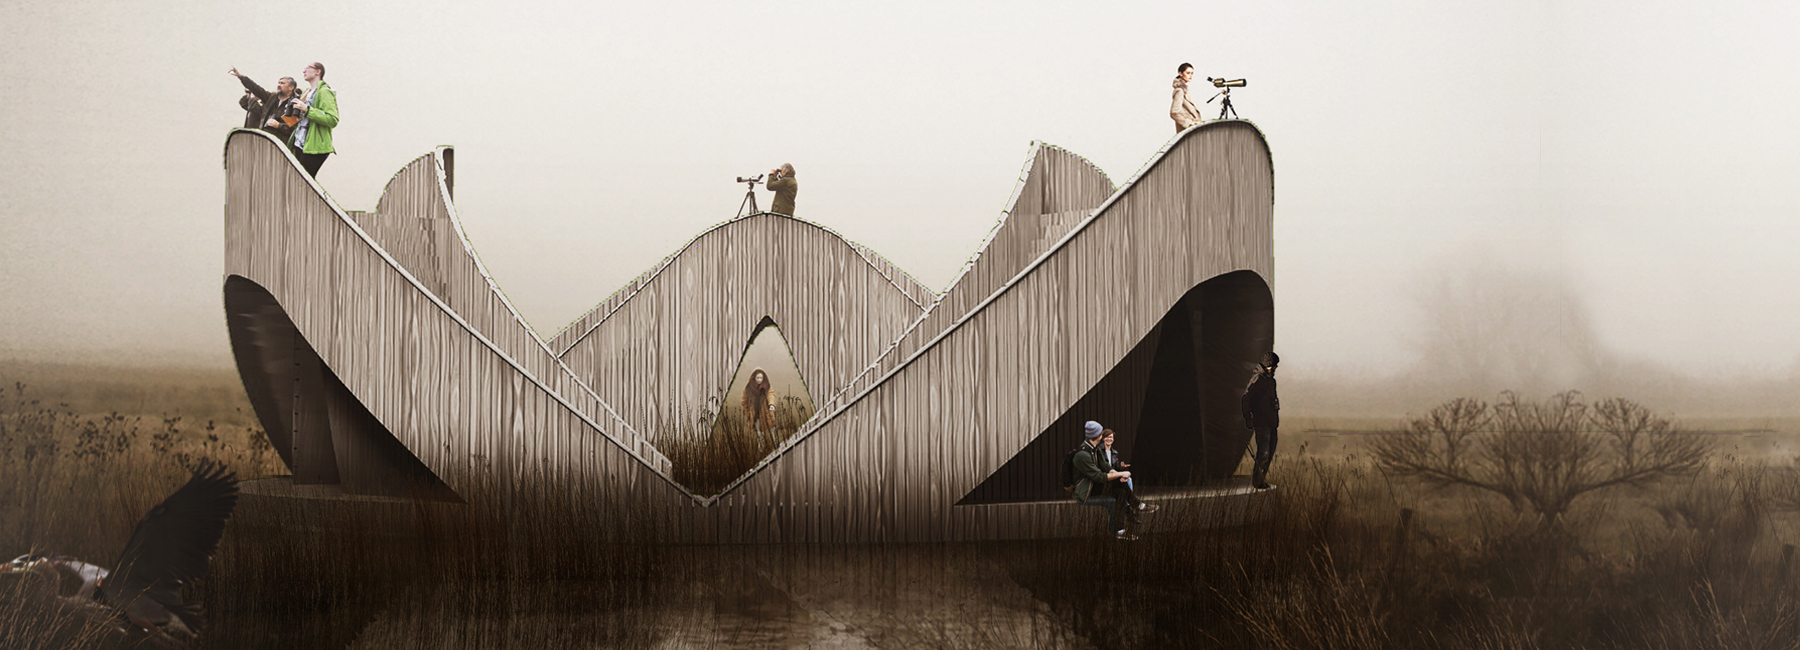 sculptural staircases combine to create the lookout-loop bird observatory